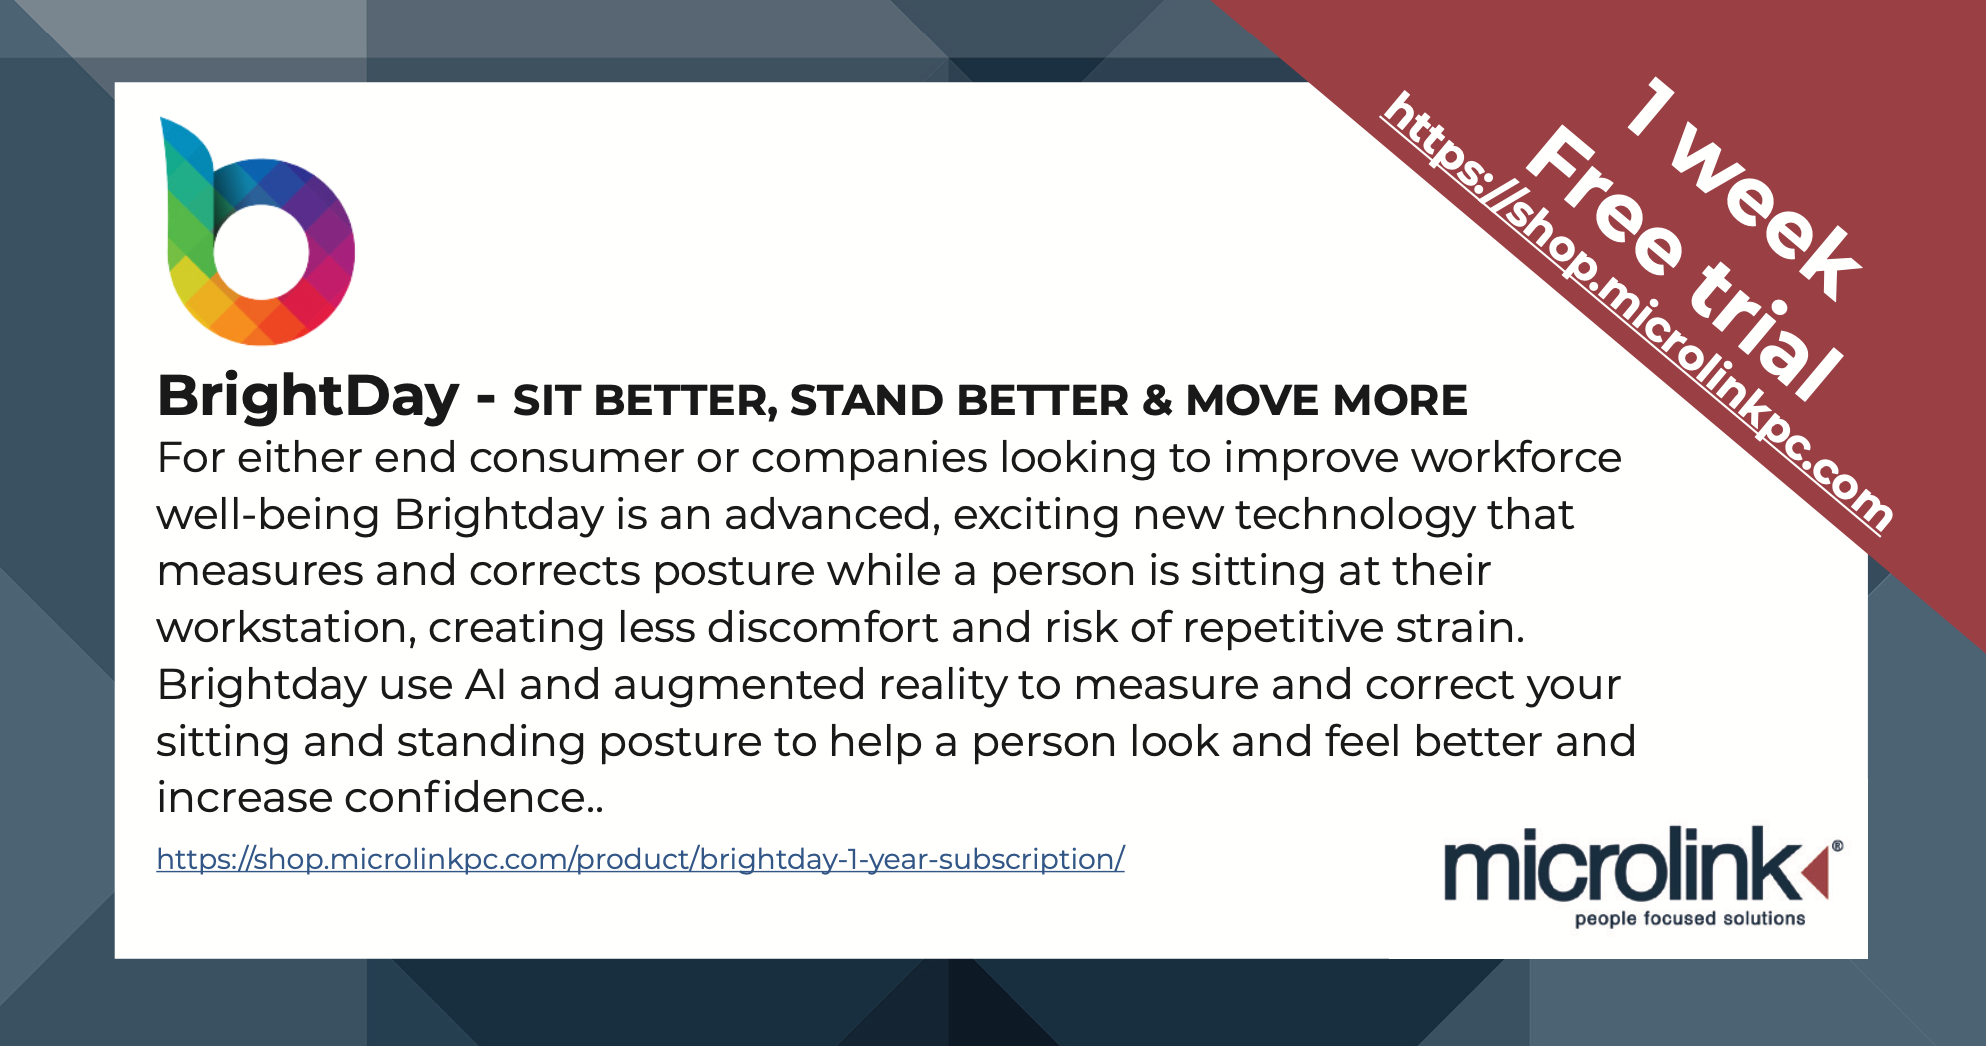 BrightDay - SIT BETTER, STAND BETTER & MOVE MORE